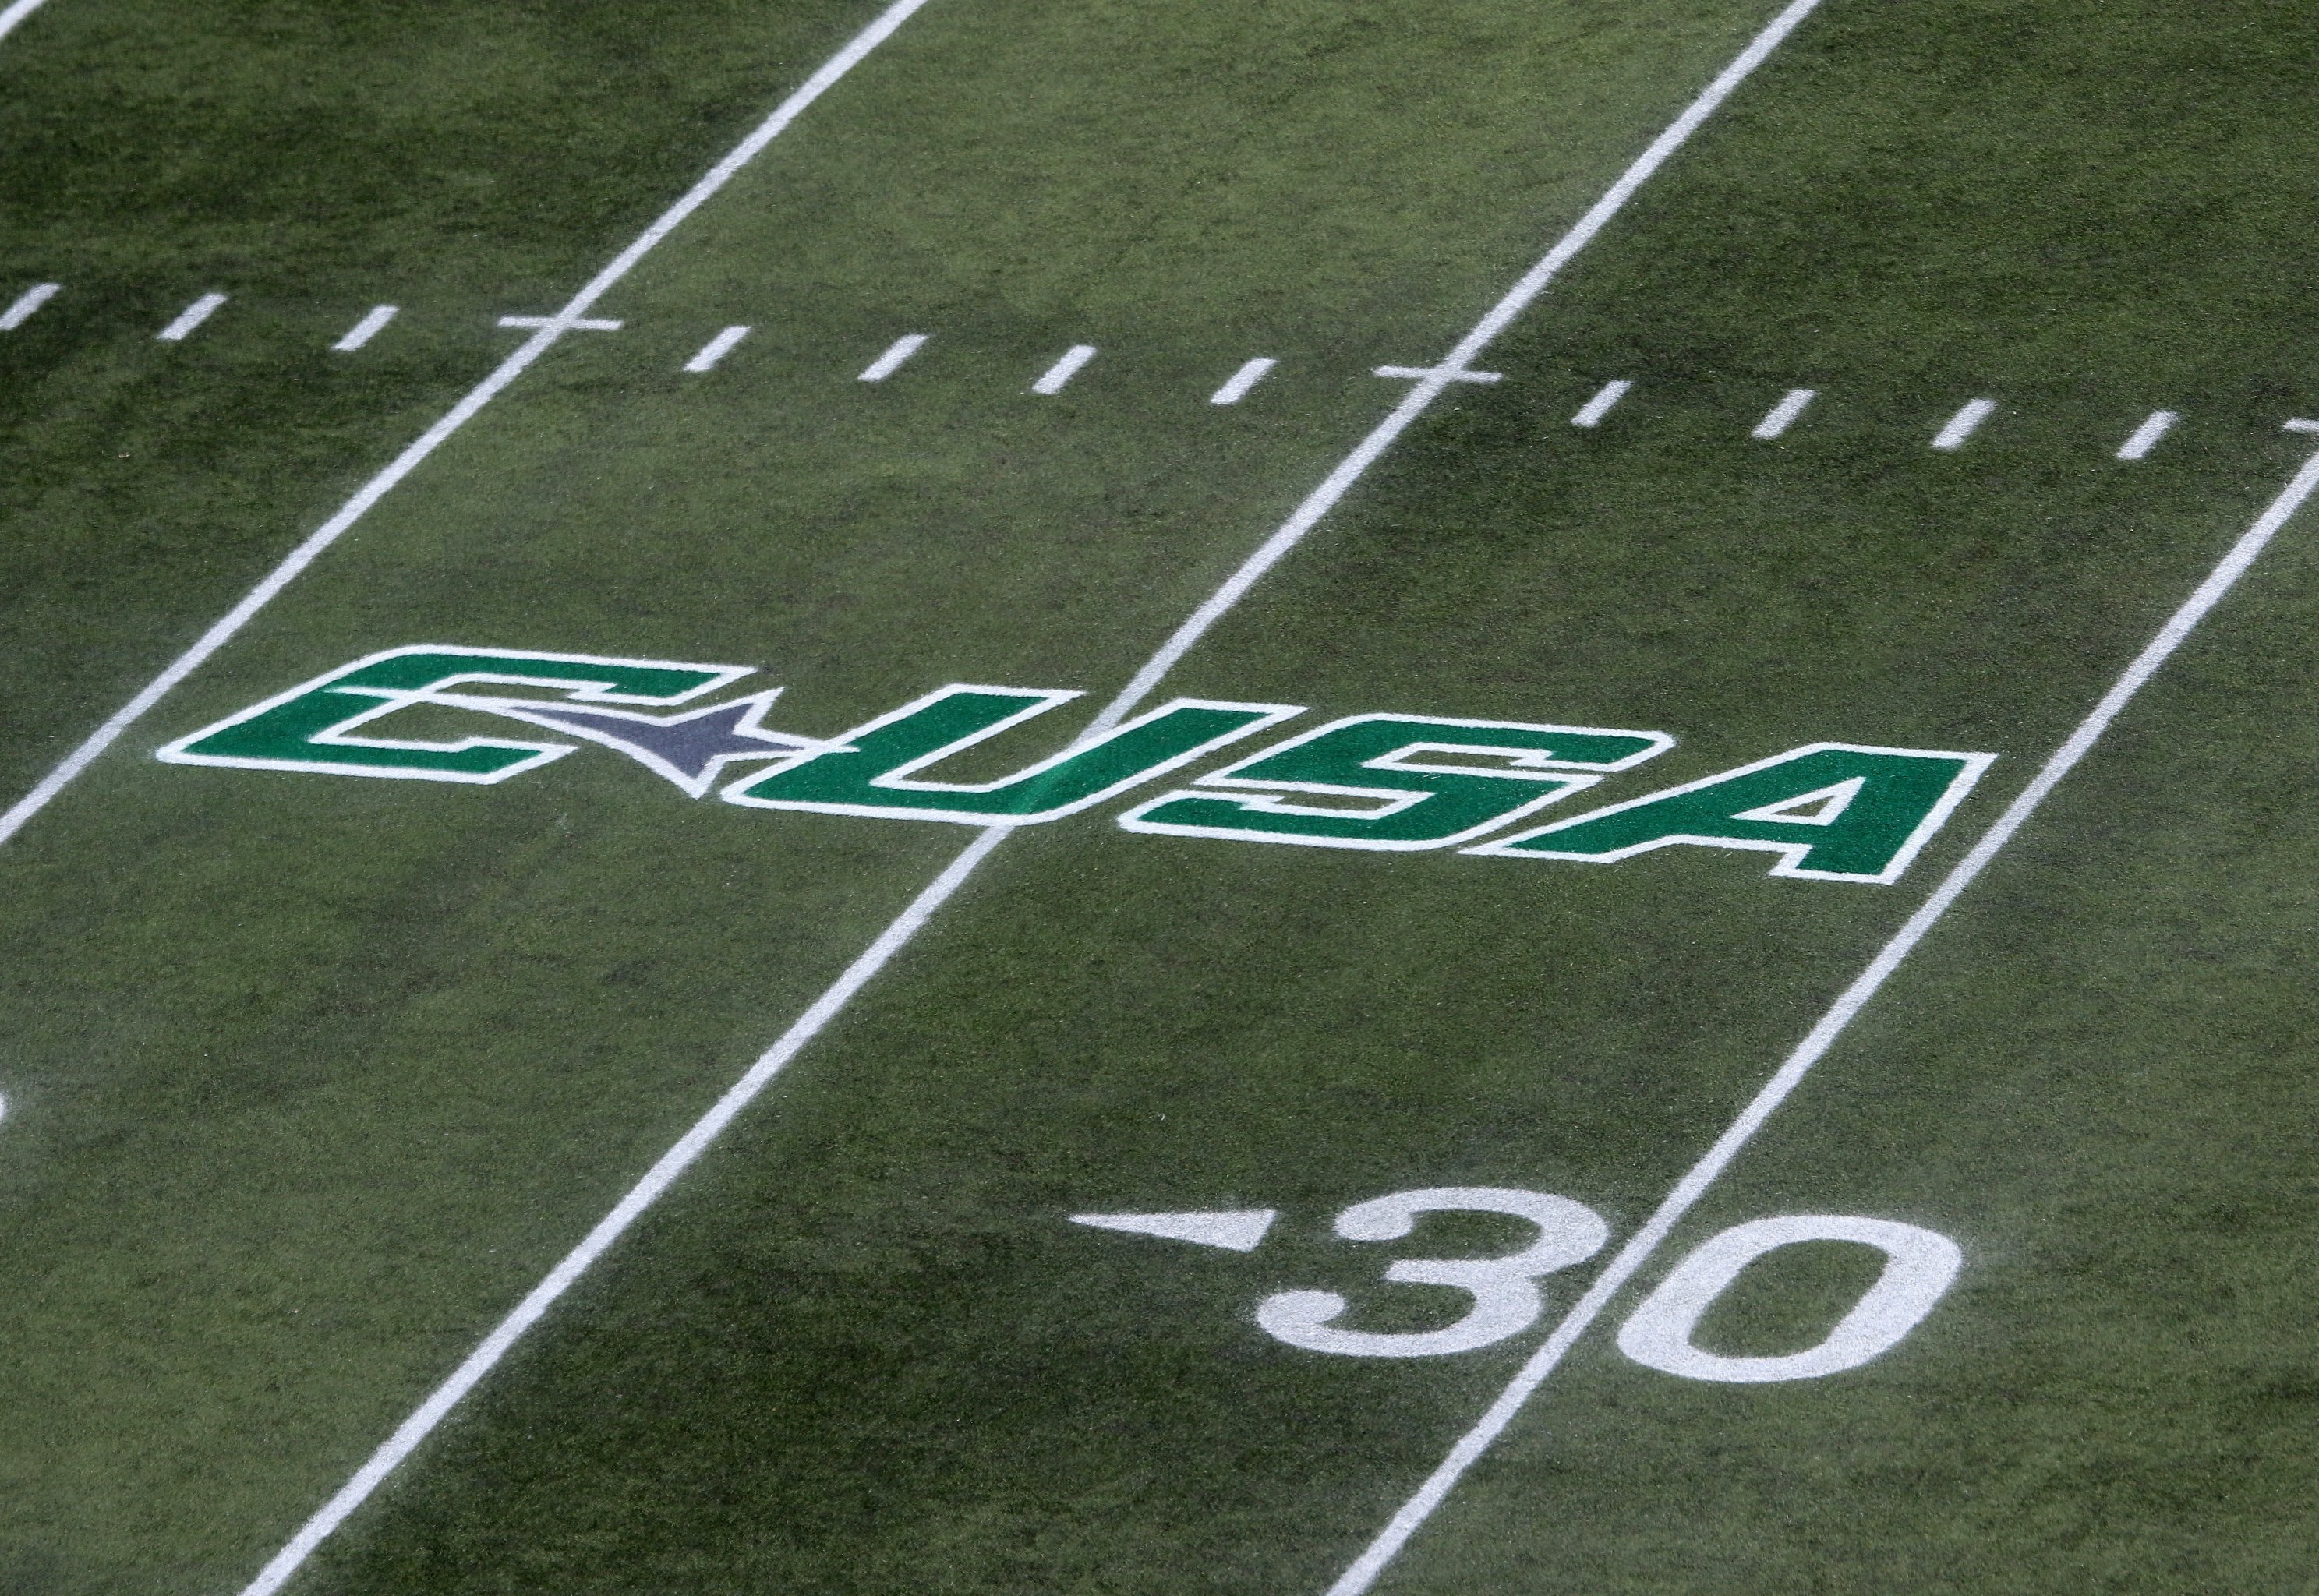 Winners And Losers Of College Football Conference Realignment News Scores Highlights Stats And Rumors Bleacher Report